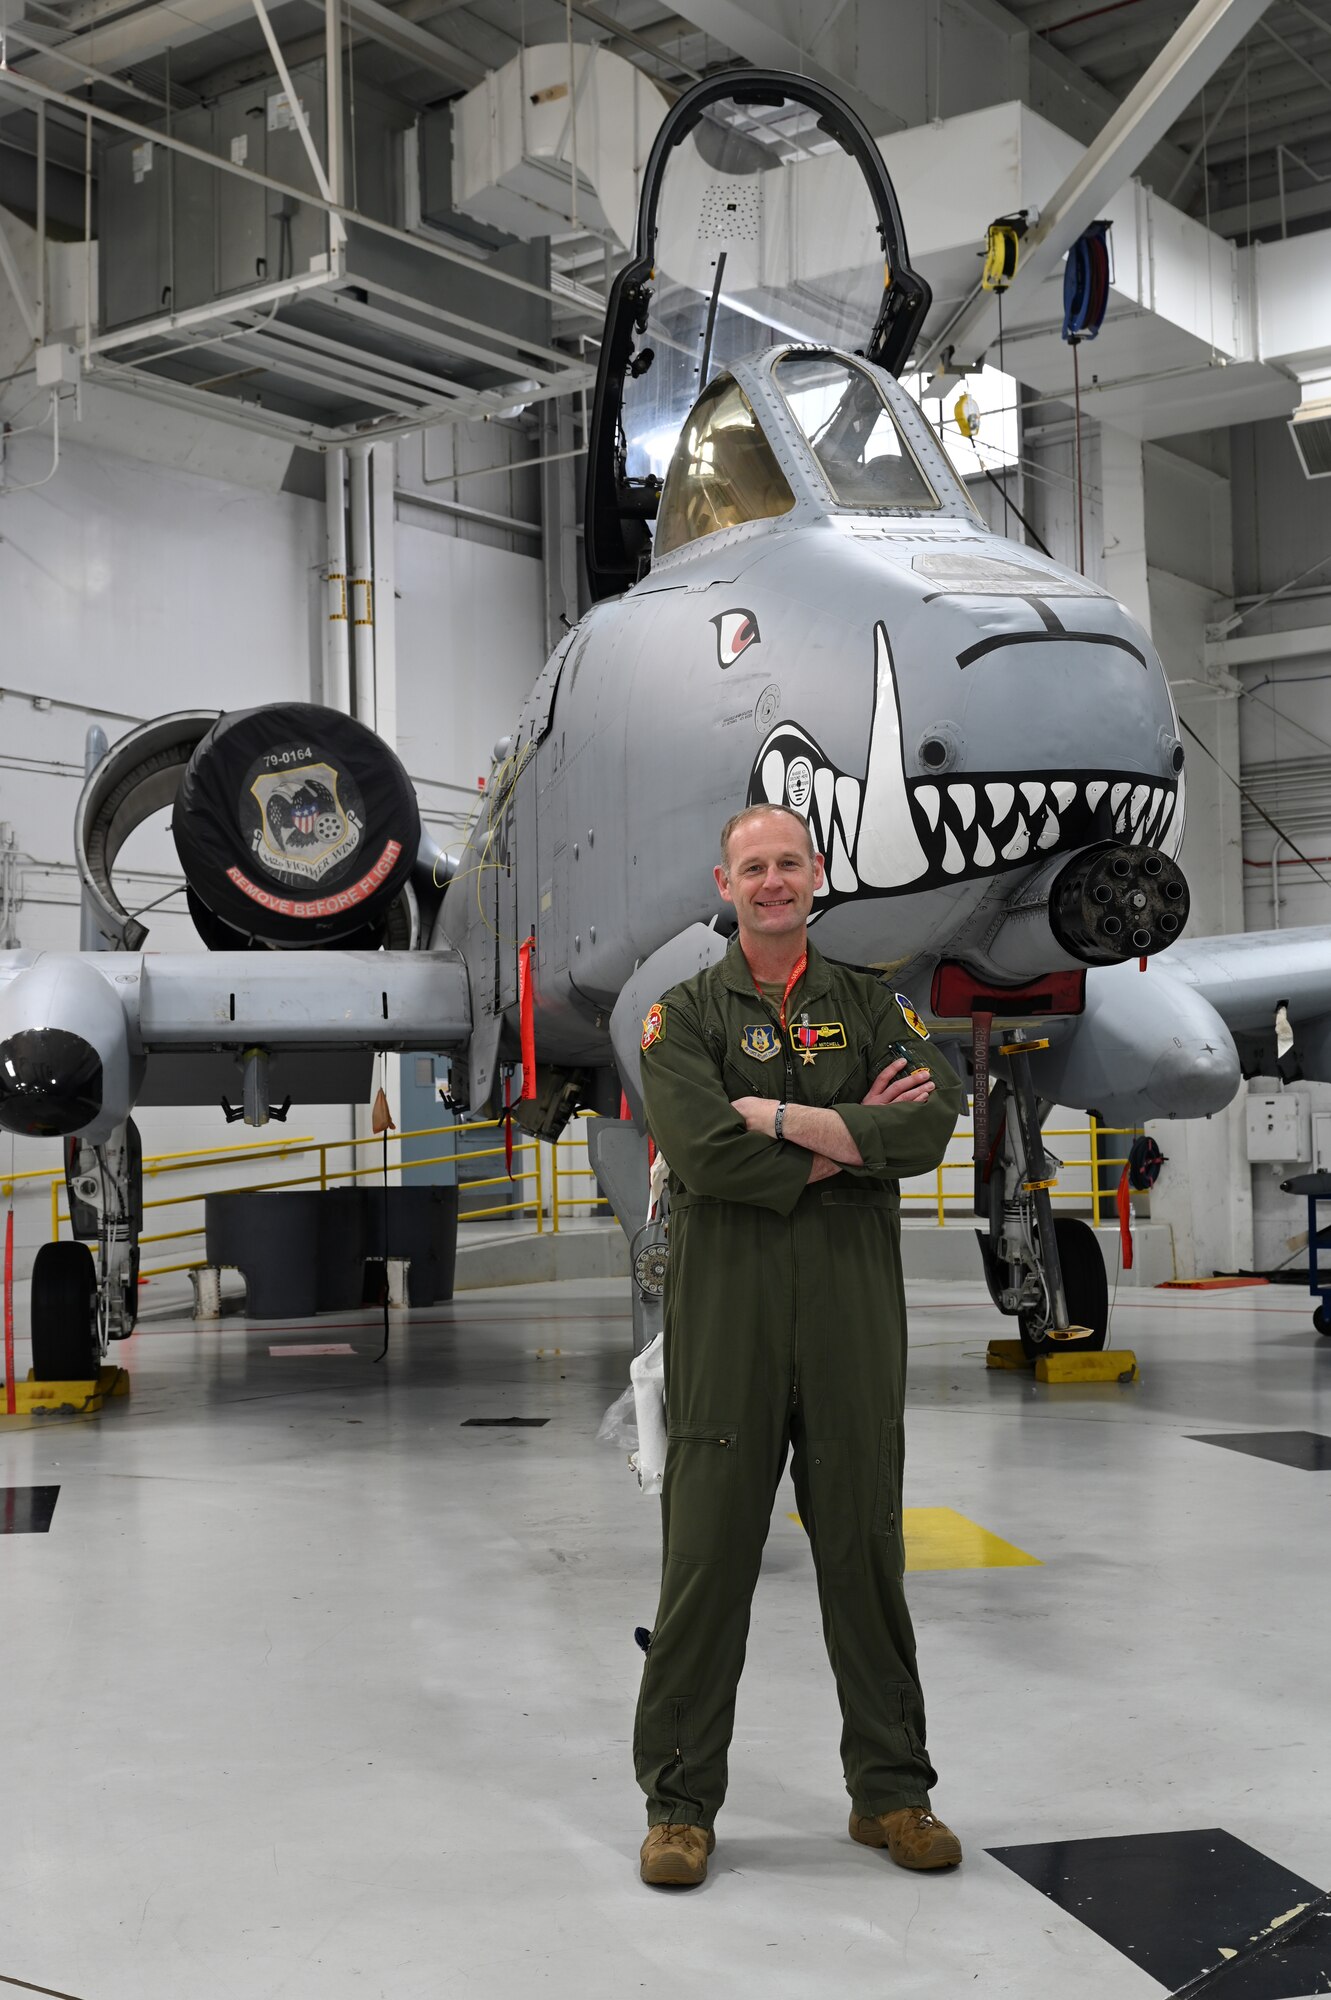 A man in an olive-green flight suit stands with arms folded in front of an A-10 Thunderbolt II in a hangar. A Bronze Star hangs from the man's chest.